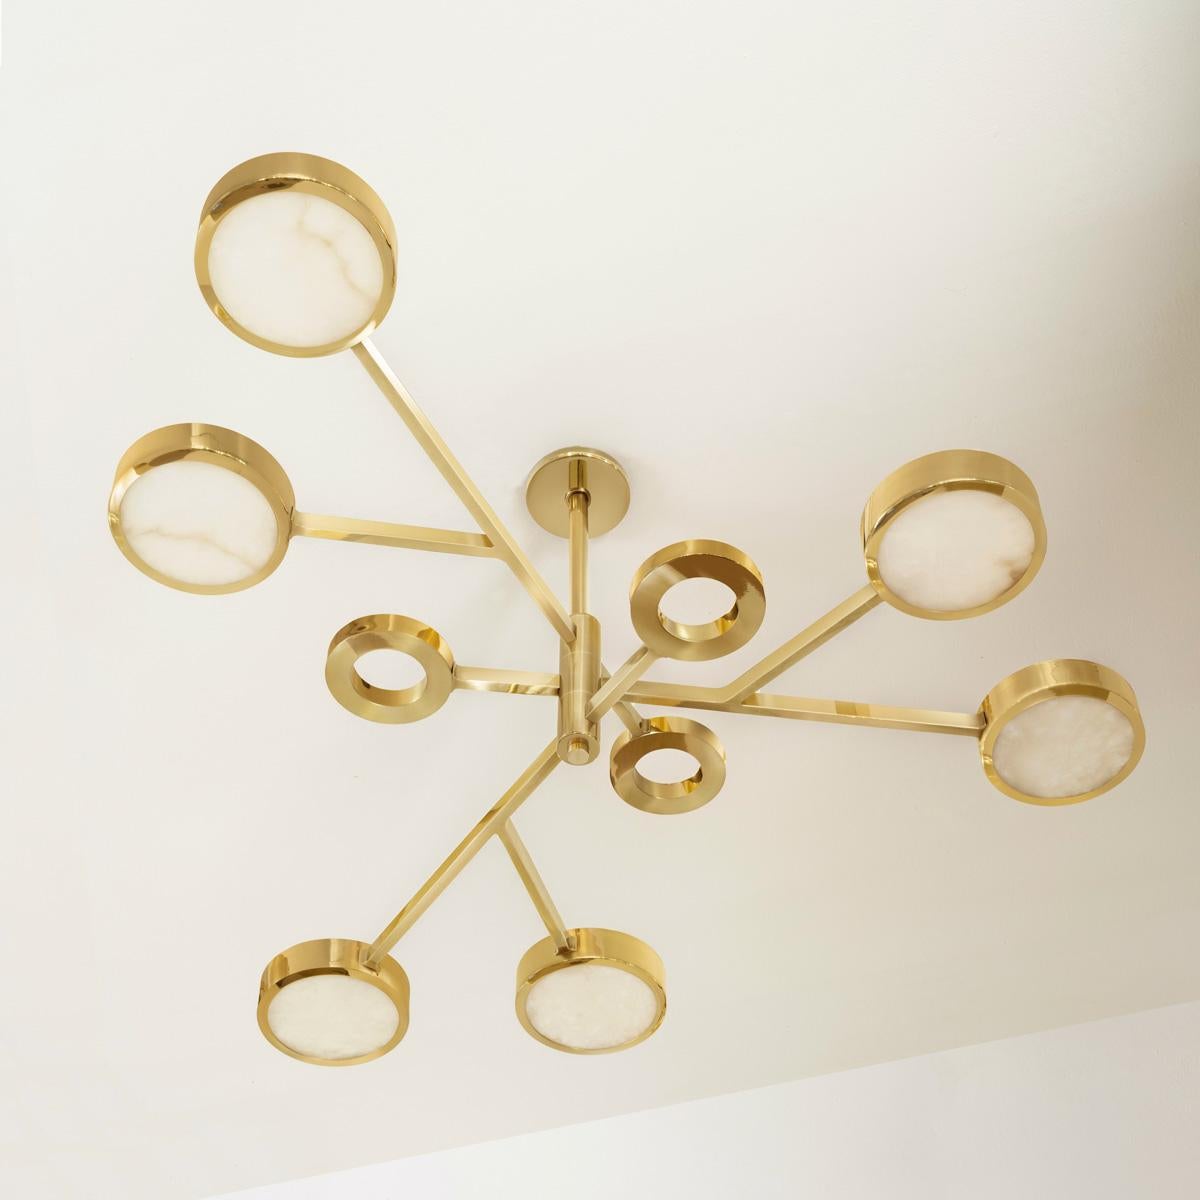 Italian Volterra Ceiling Light by Gaspare Asaro-Satin Nickel and Satin Brass Finish For Sale